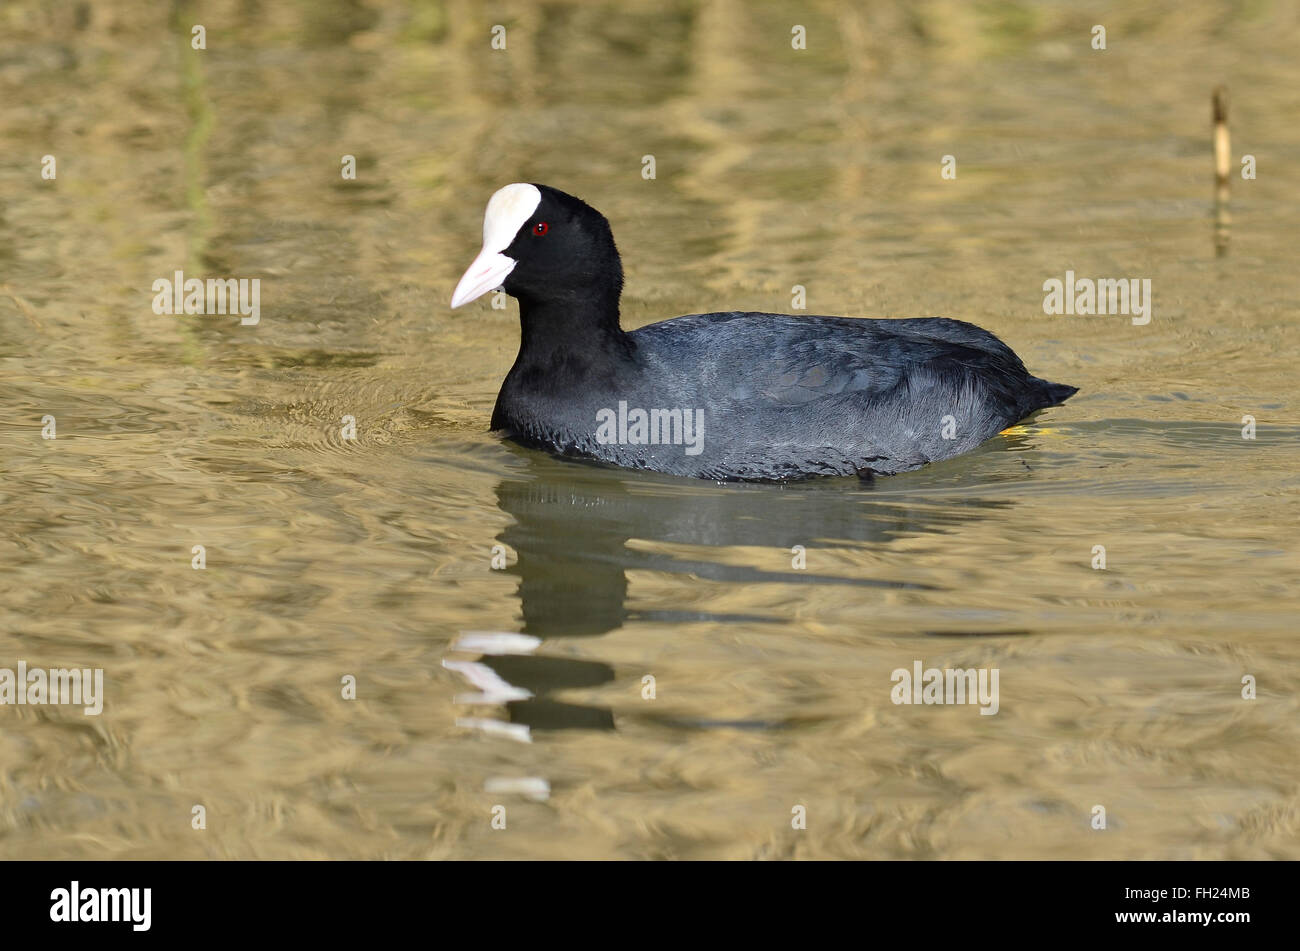 A coot swimming on the water UK Stock Photo